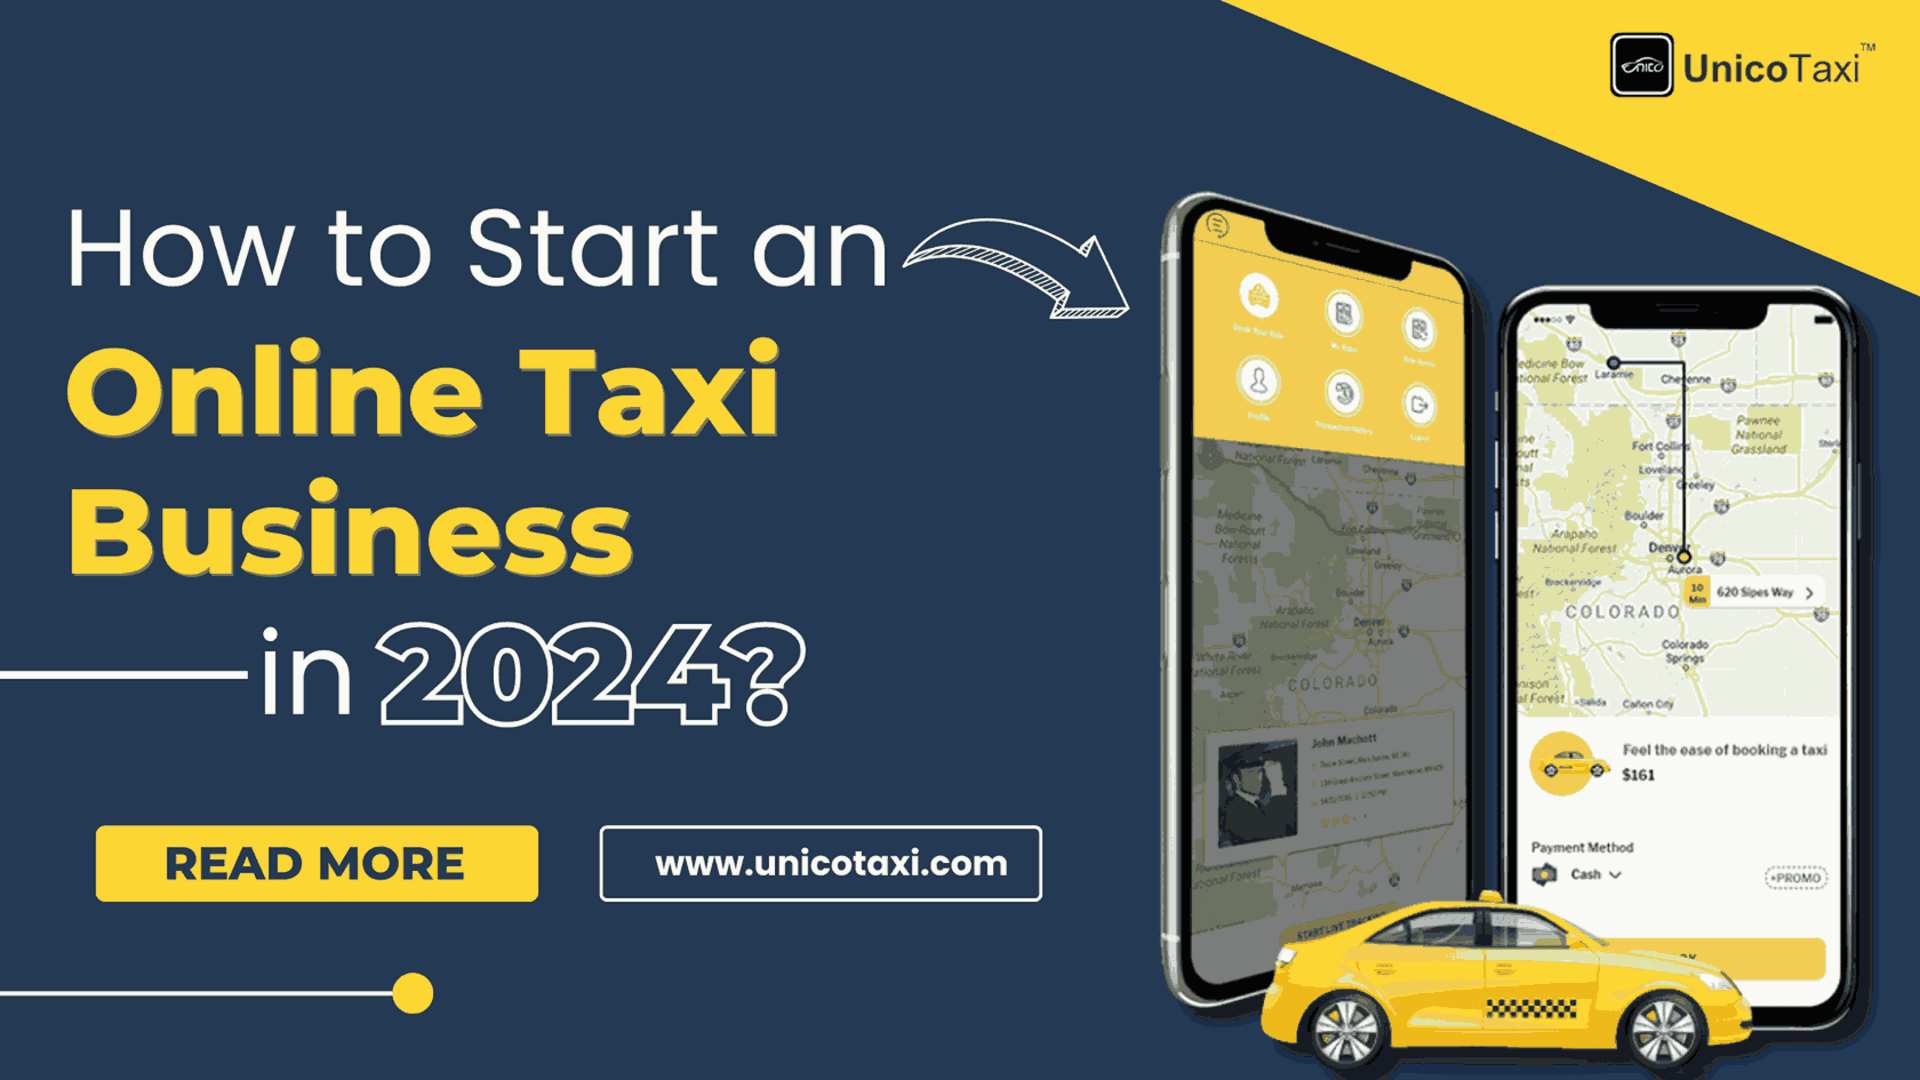 How to Start an Online Taxi Business in 2024?